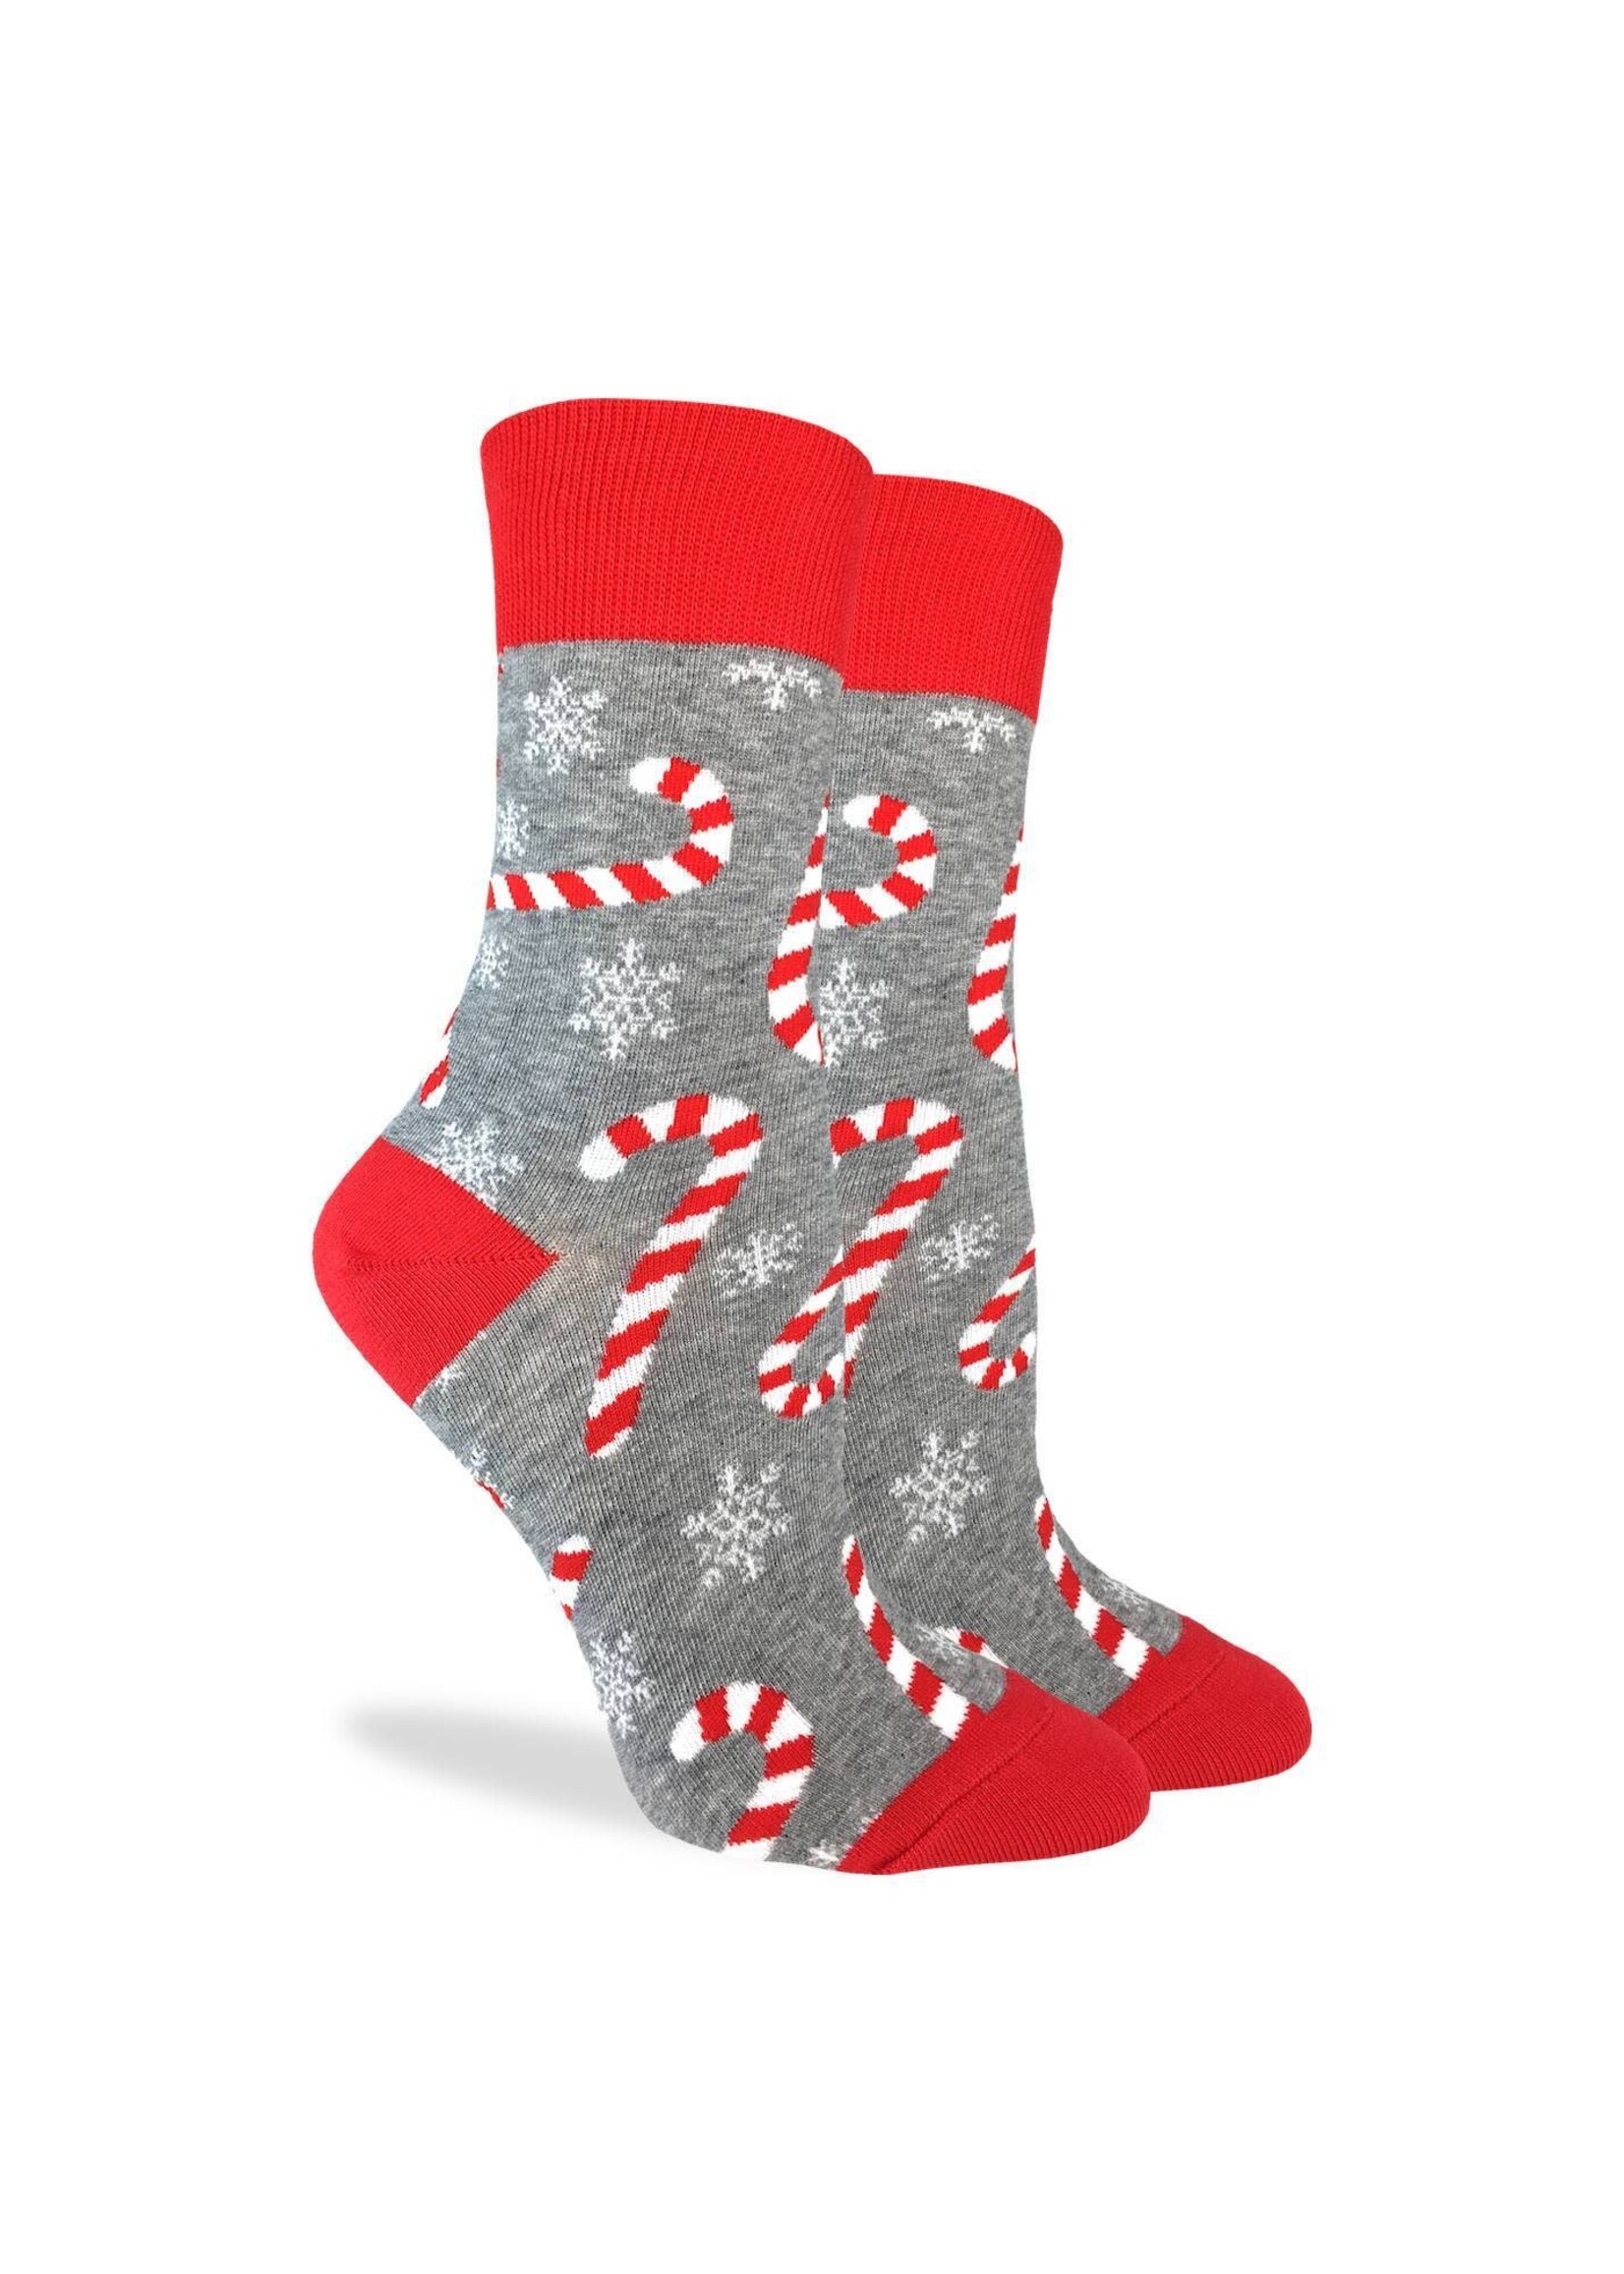 Good Luck Sock Good Luck Socks Candy Cane- Youth 5-9